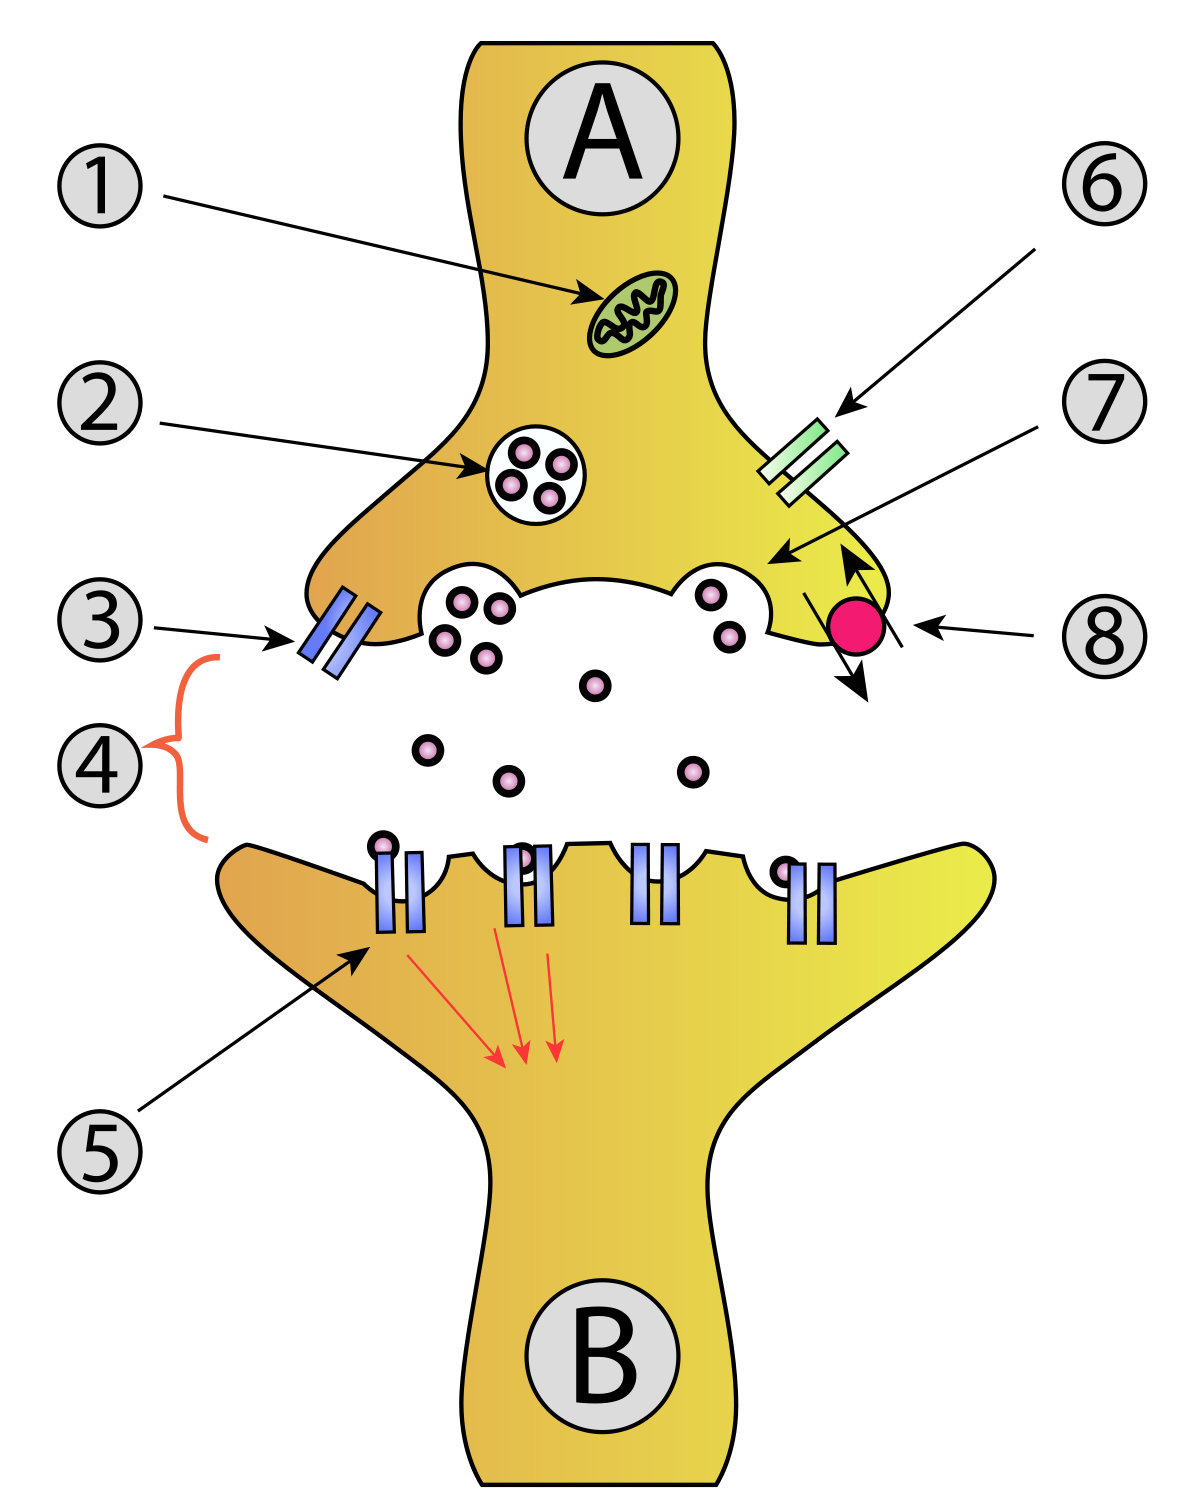 synapse diagram unlabeled